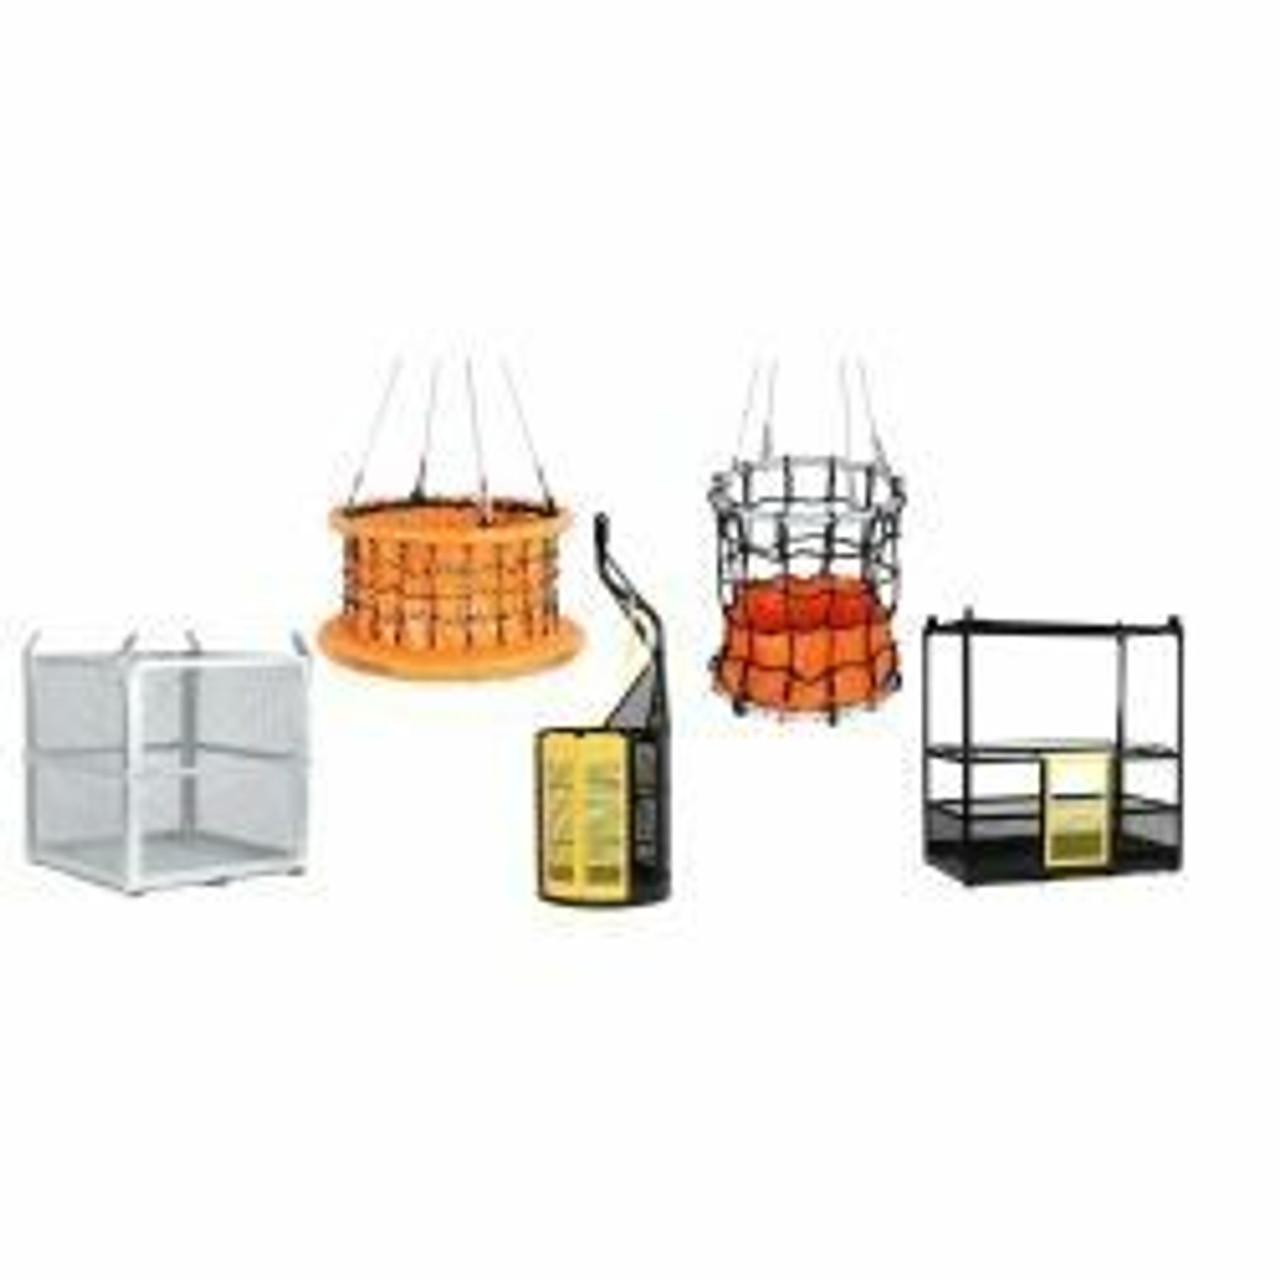 Self-Retracting Collapsible Baskets